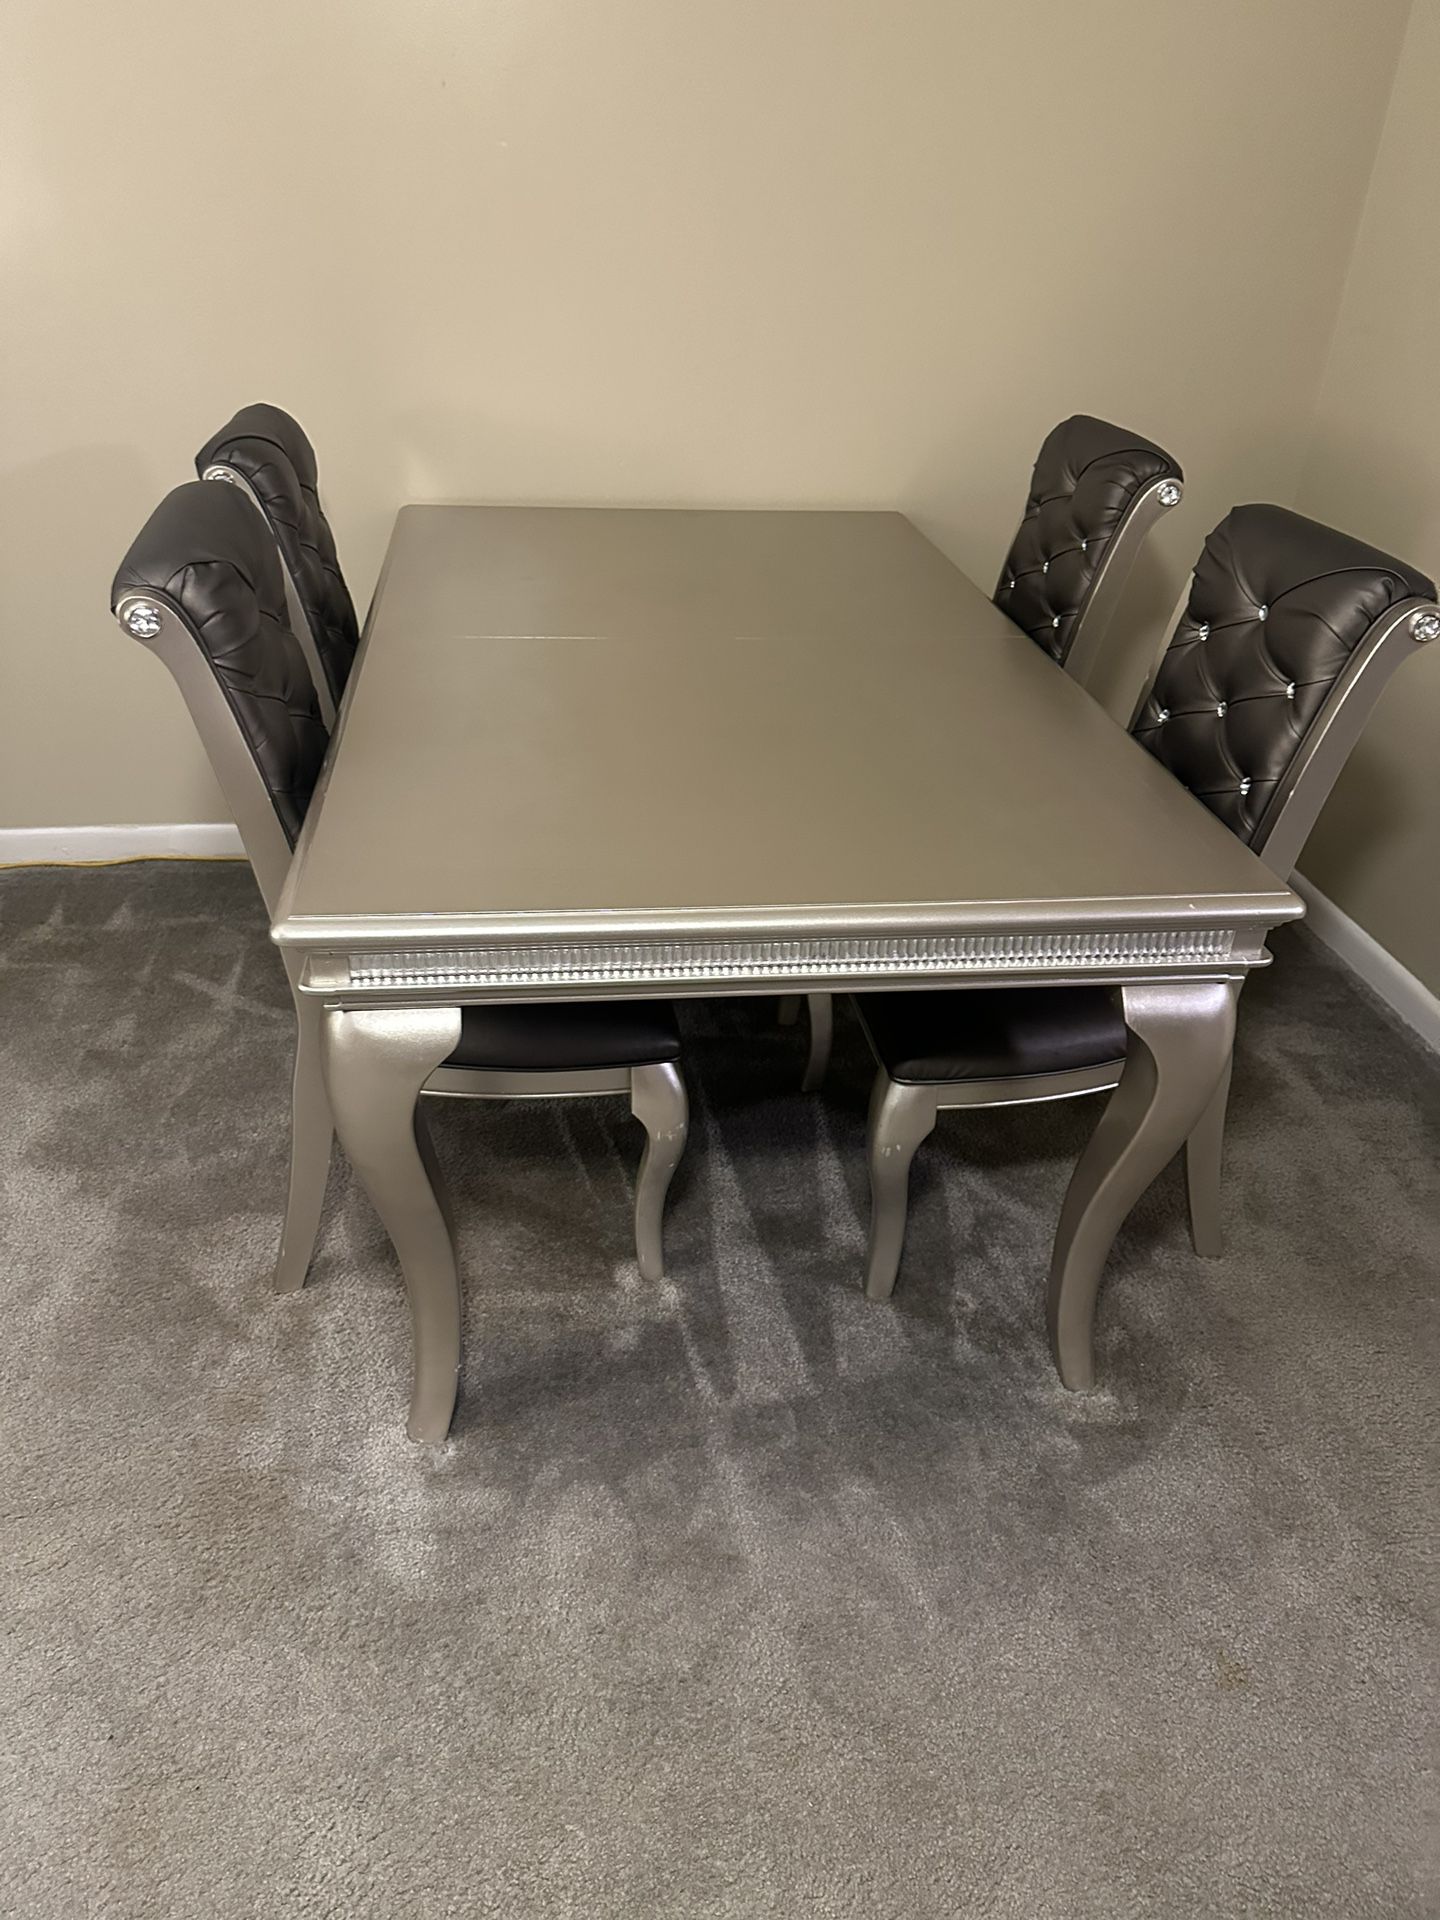 Dinning Room Table With 4 Chairs 